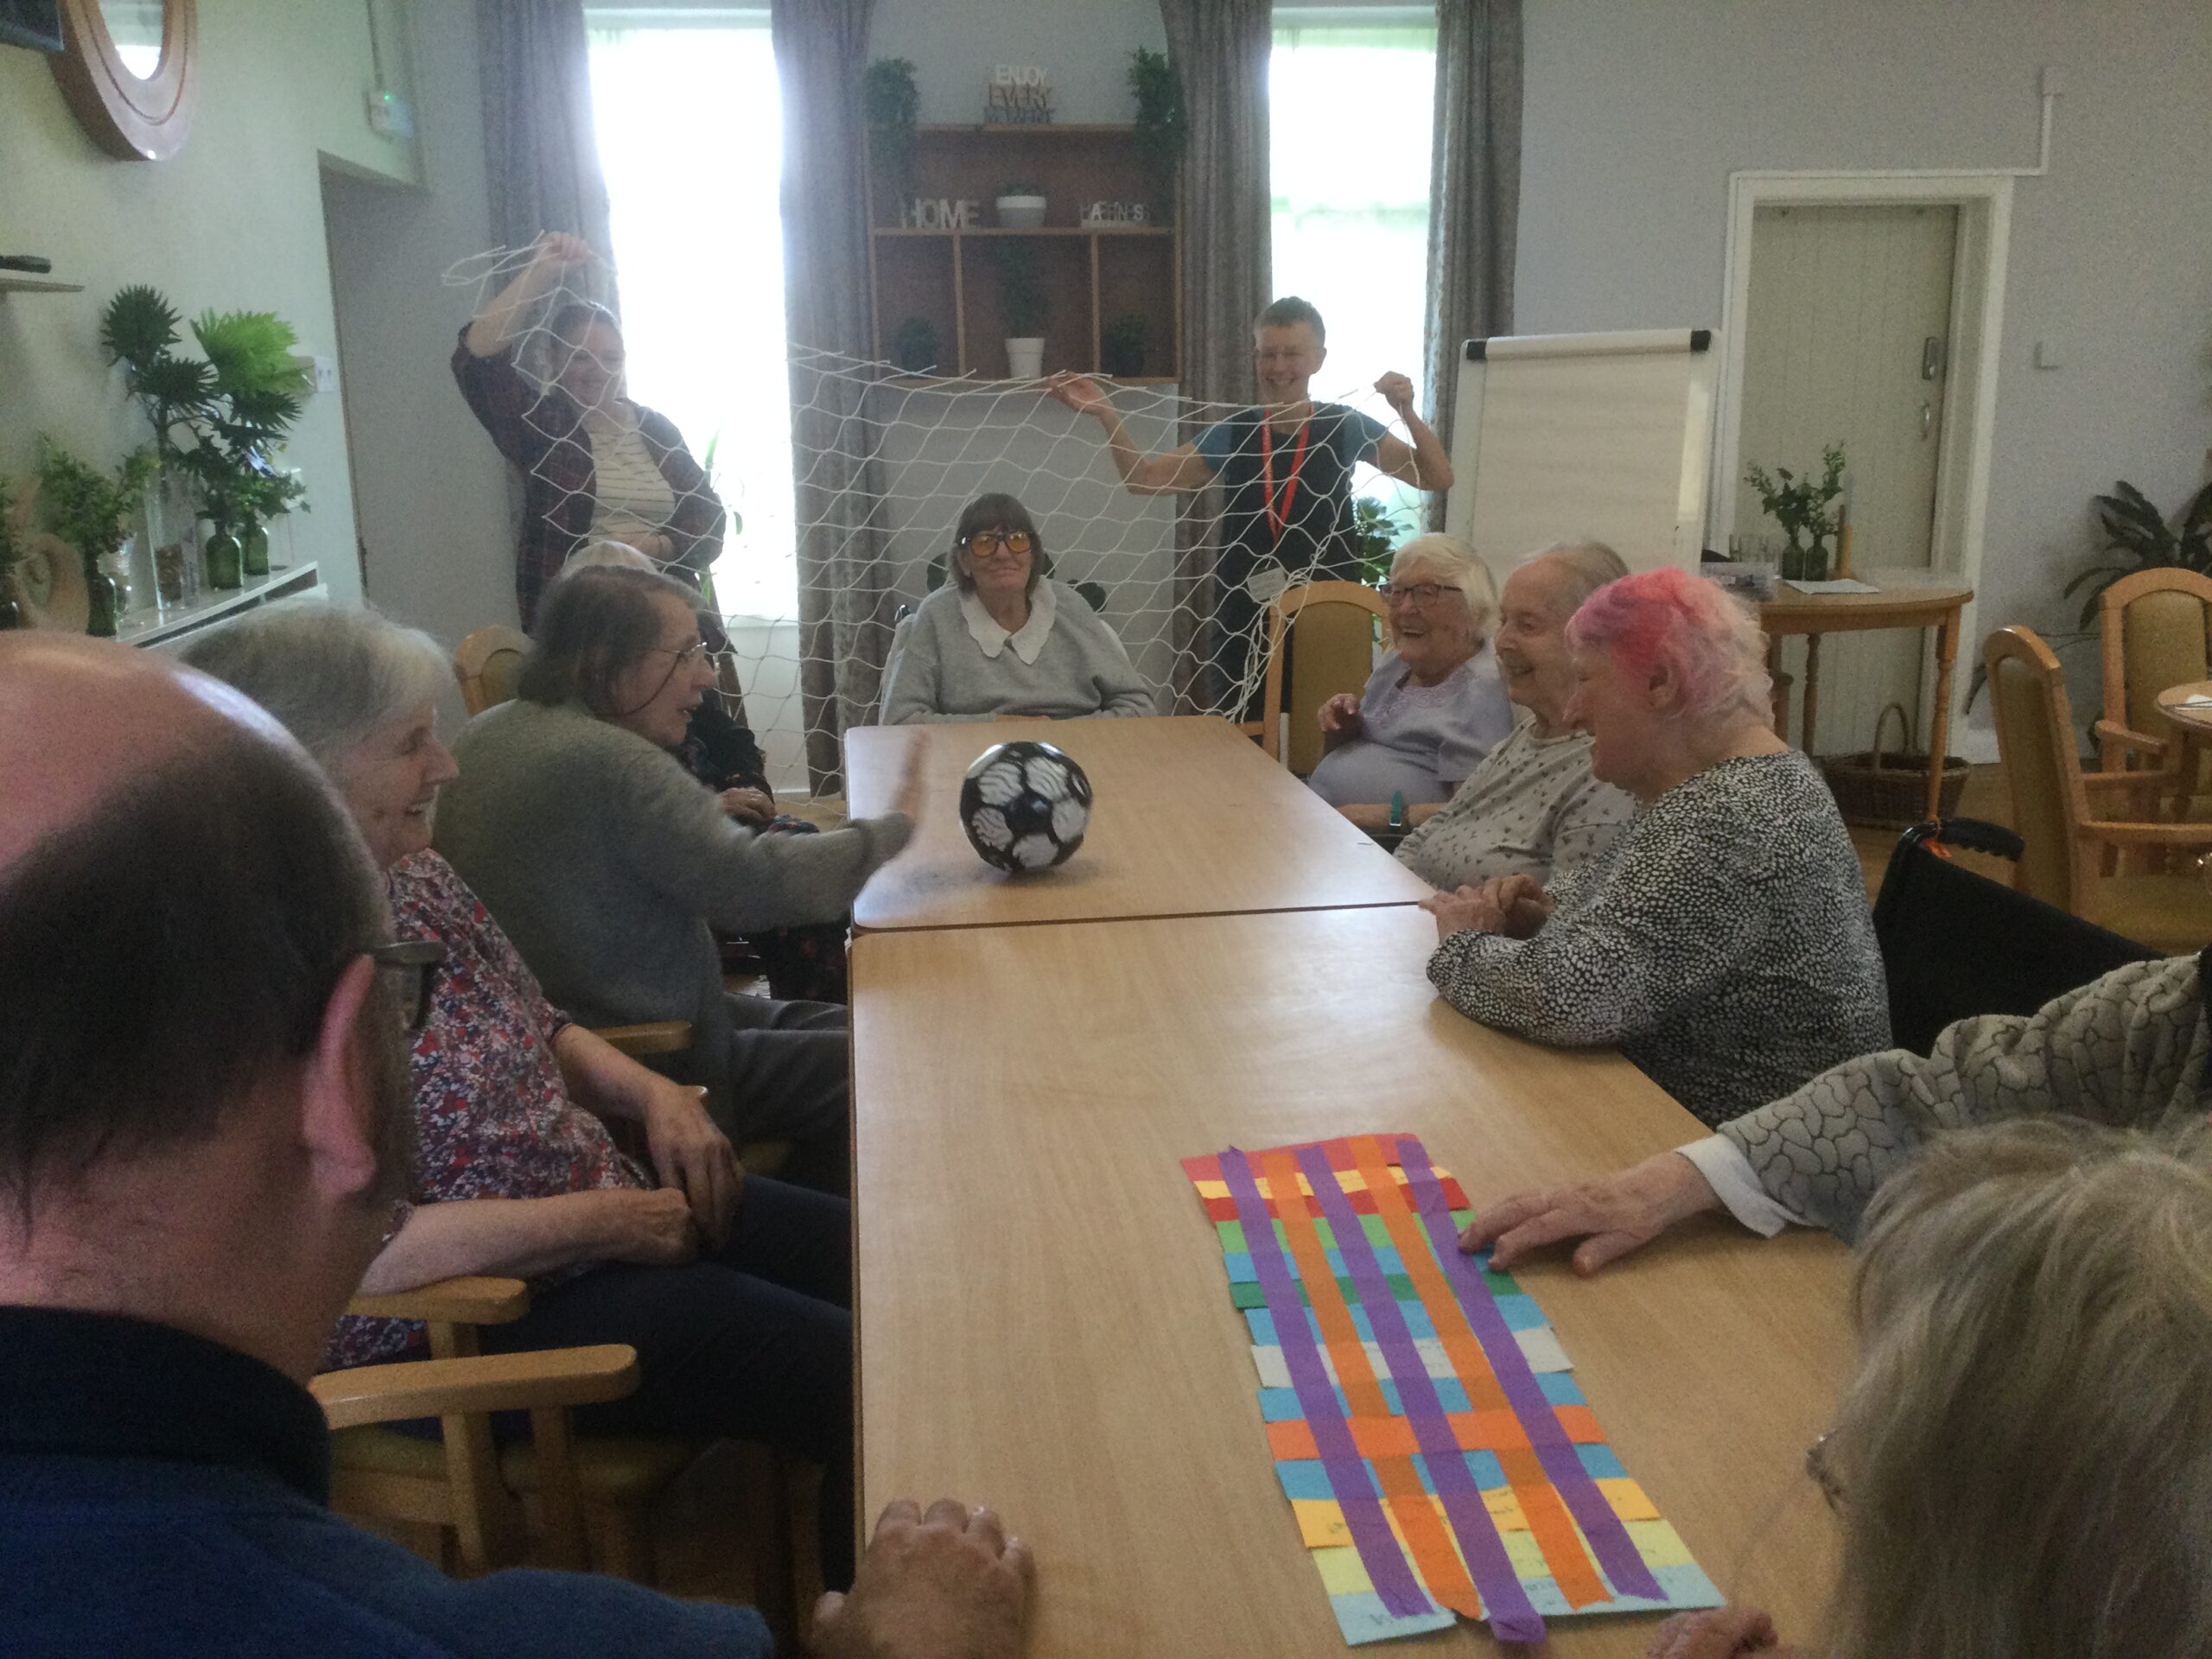 People sit either side of a long table, passing a black and white football back and forth. Behind the person seated at the end stand two people holding up a net like a football net. A multicolour piece of paper lies on the table nearest the camera